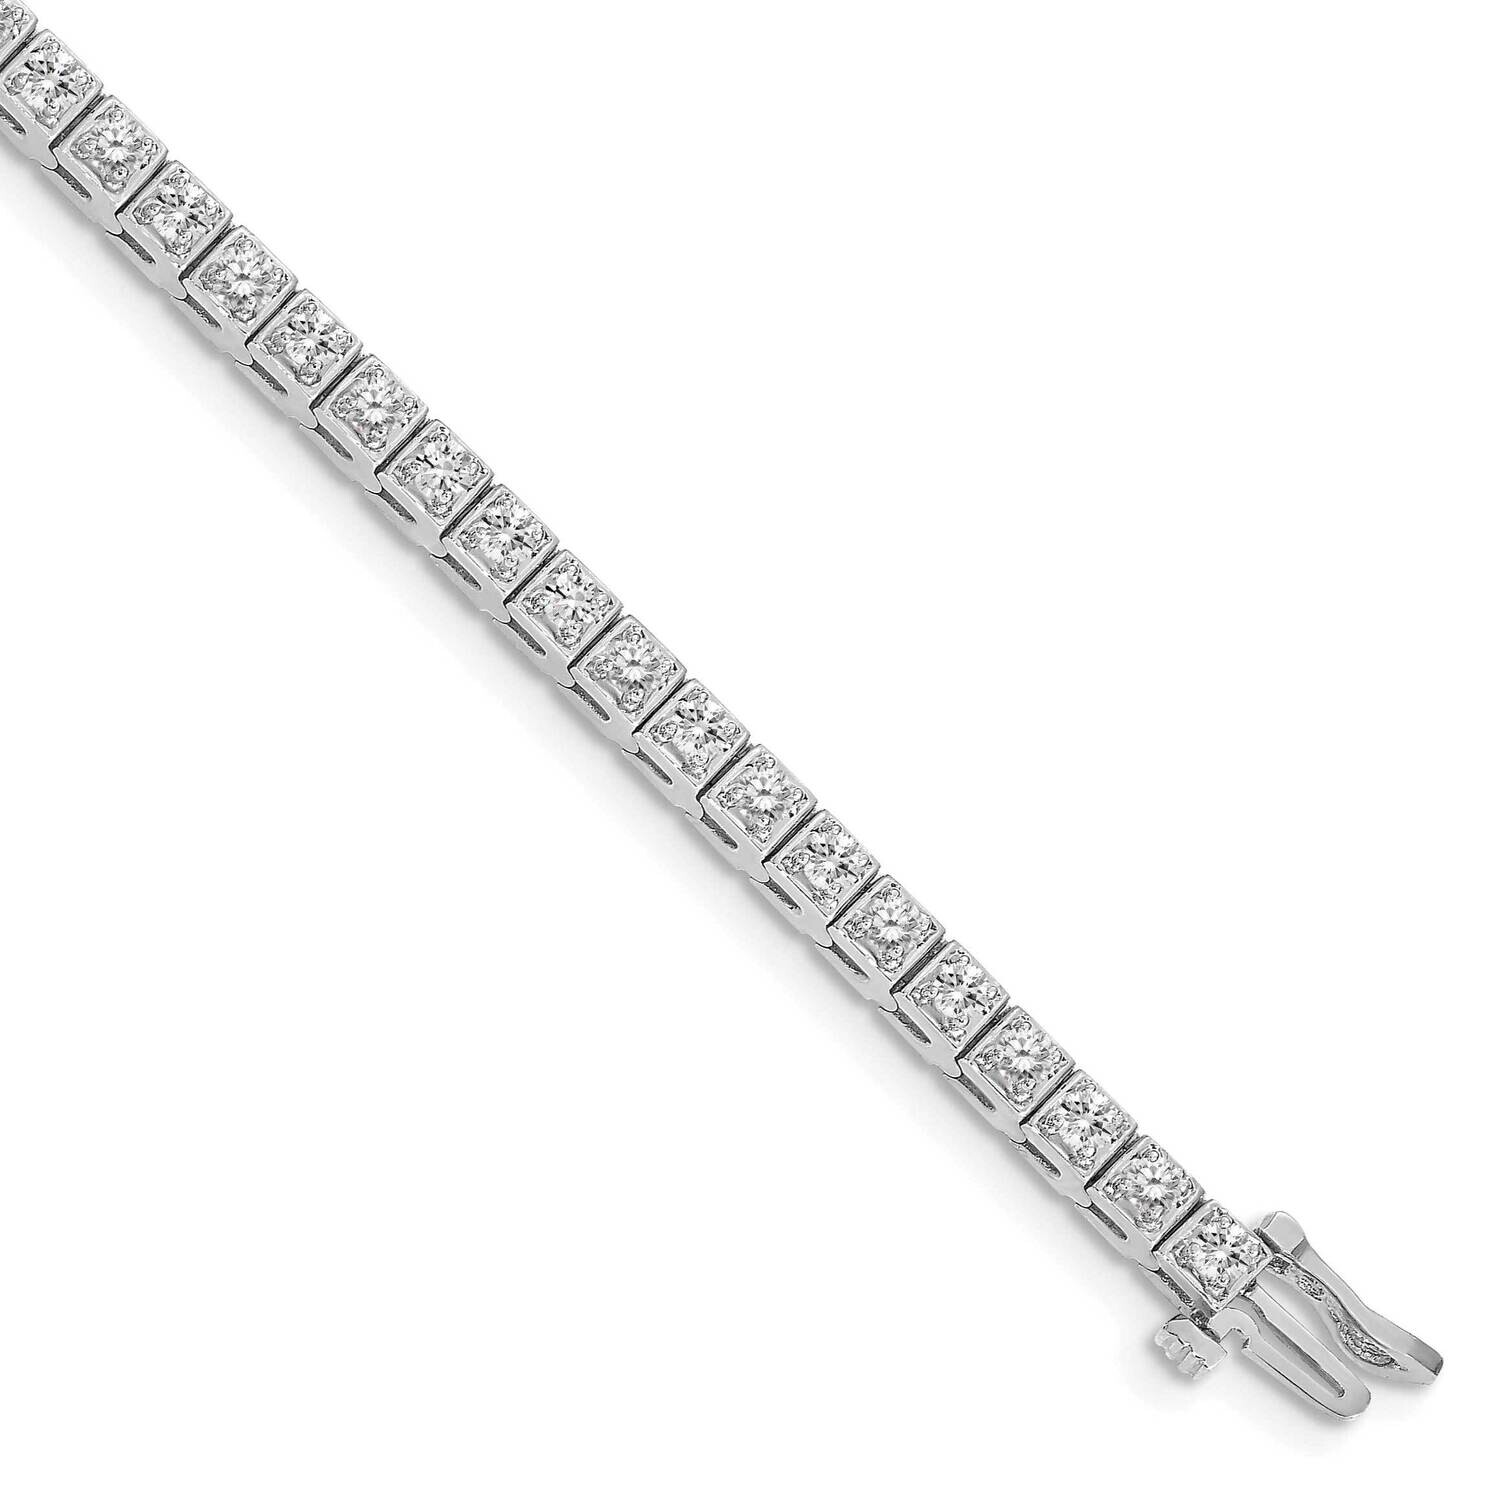 Holds 44 2.2mm Stones 1.8ct Square Link Tennis Bracelet Mounting 14k White Gold X755W